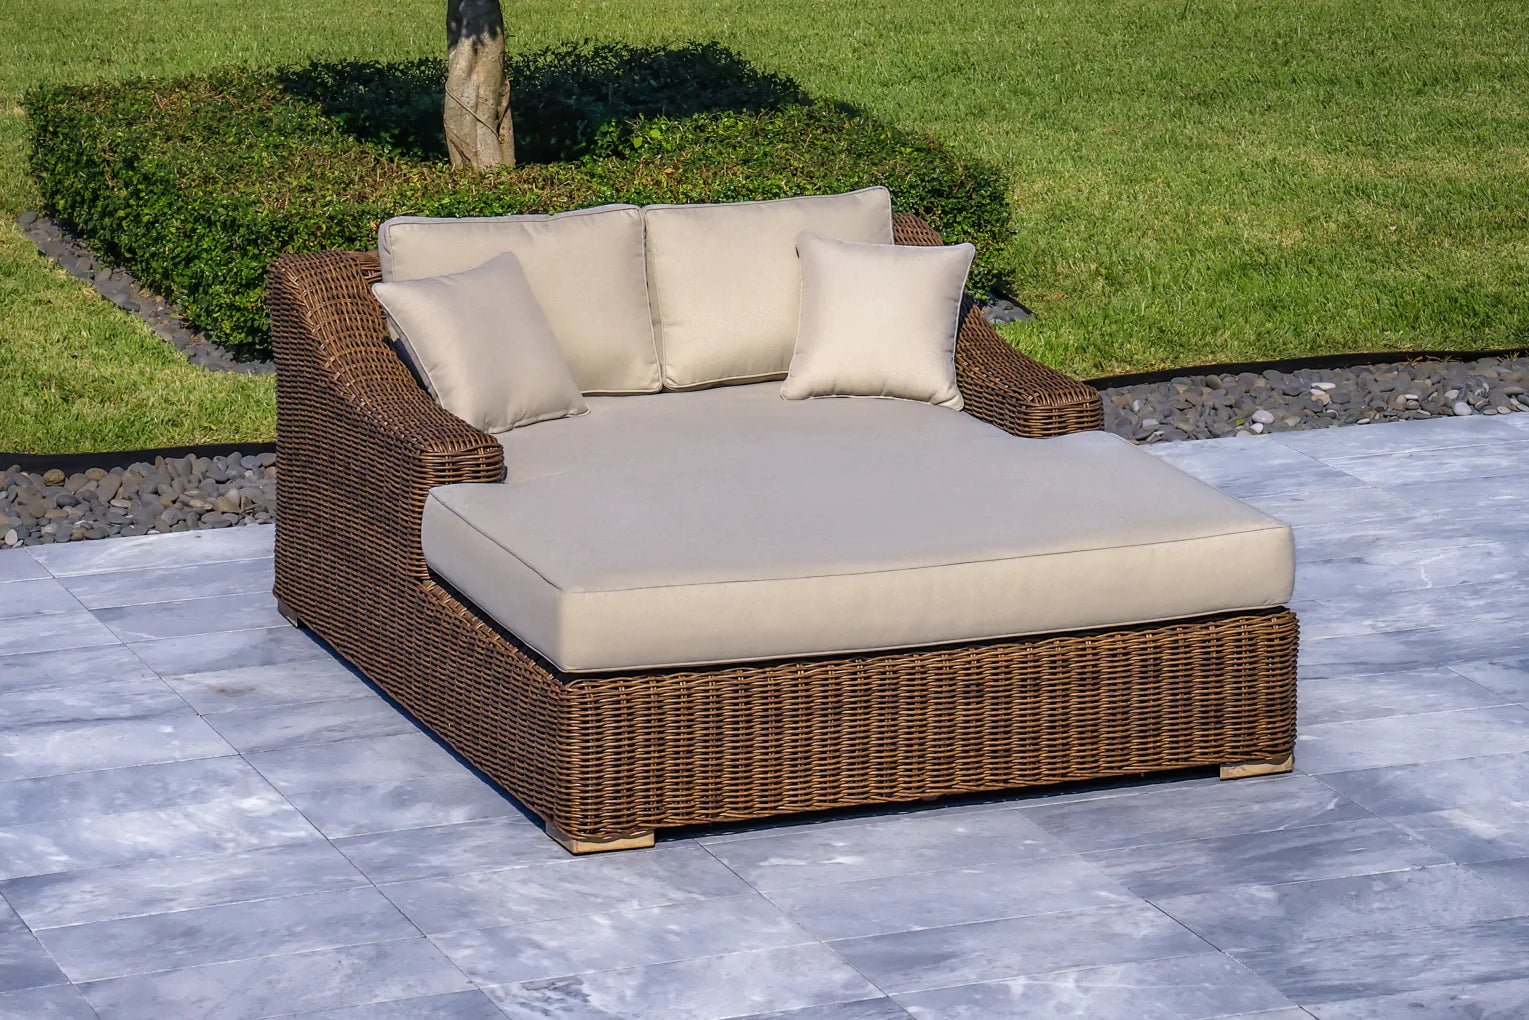 OUTSY - Milo 79 X 59 Inch Outdoor Wicker Aluminum Frame Extra Large Double Sun Lounger in Brown - 0AMI-SL-XL-BR